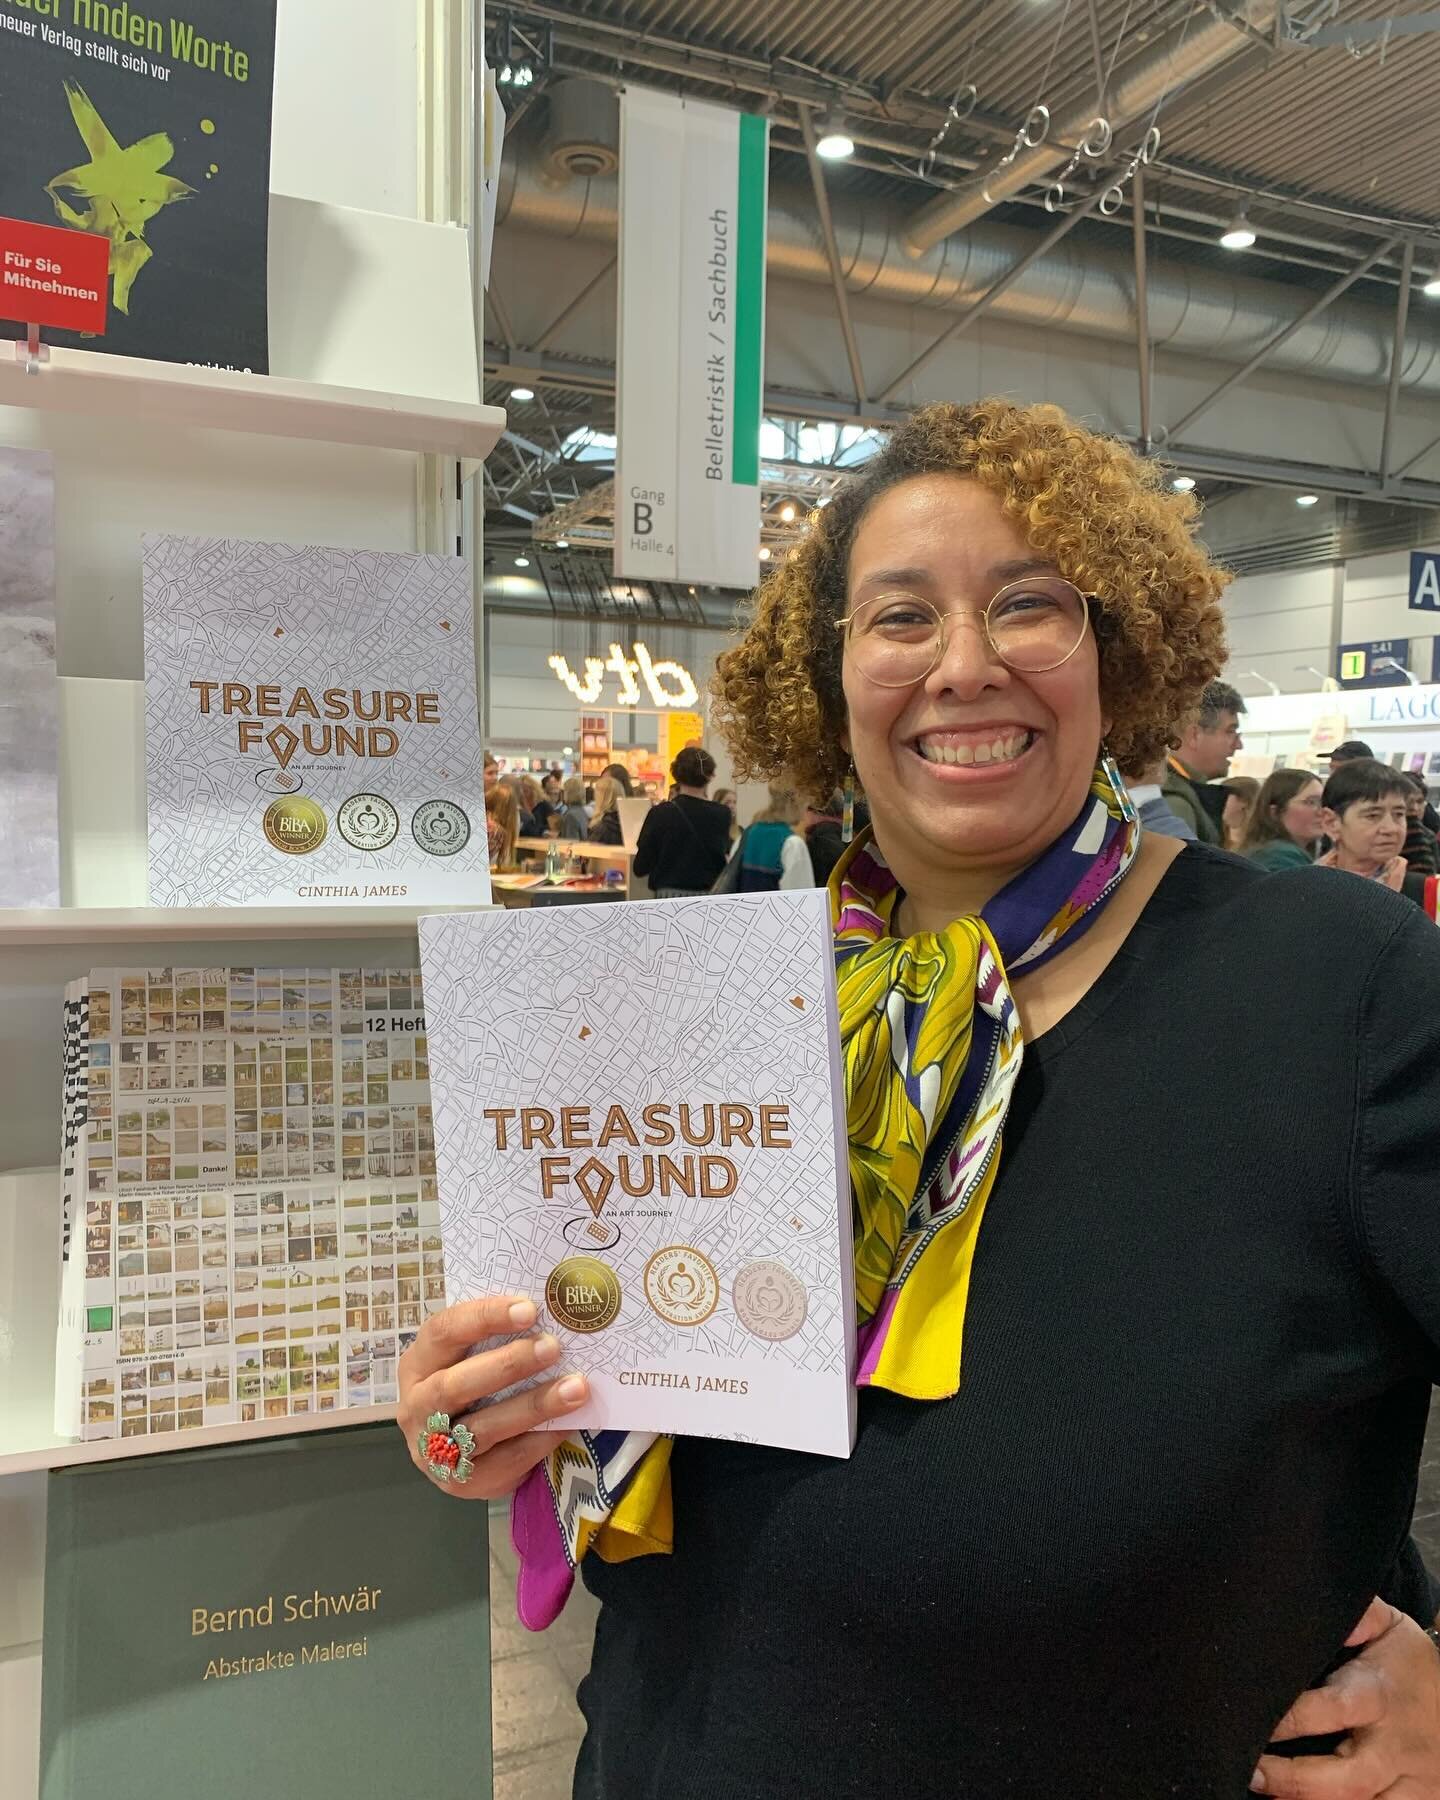 So excited to see &ldquo;Treasure Found: An Art Journey&rdquo; at the Leipziger Buchmesse in the Livro booth alongside other self-published authors! The fair runs from March 21st to 24th, and it&rsquo;s incredible to be part of this community. 

#Lei